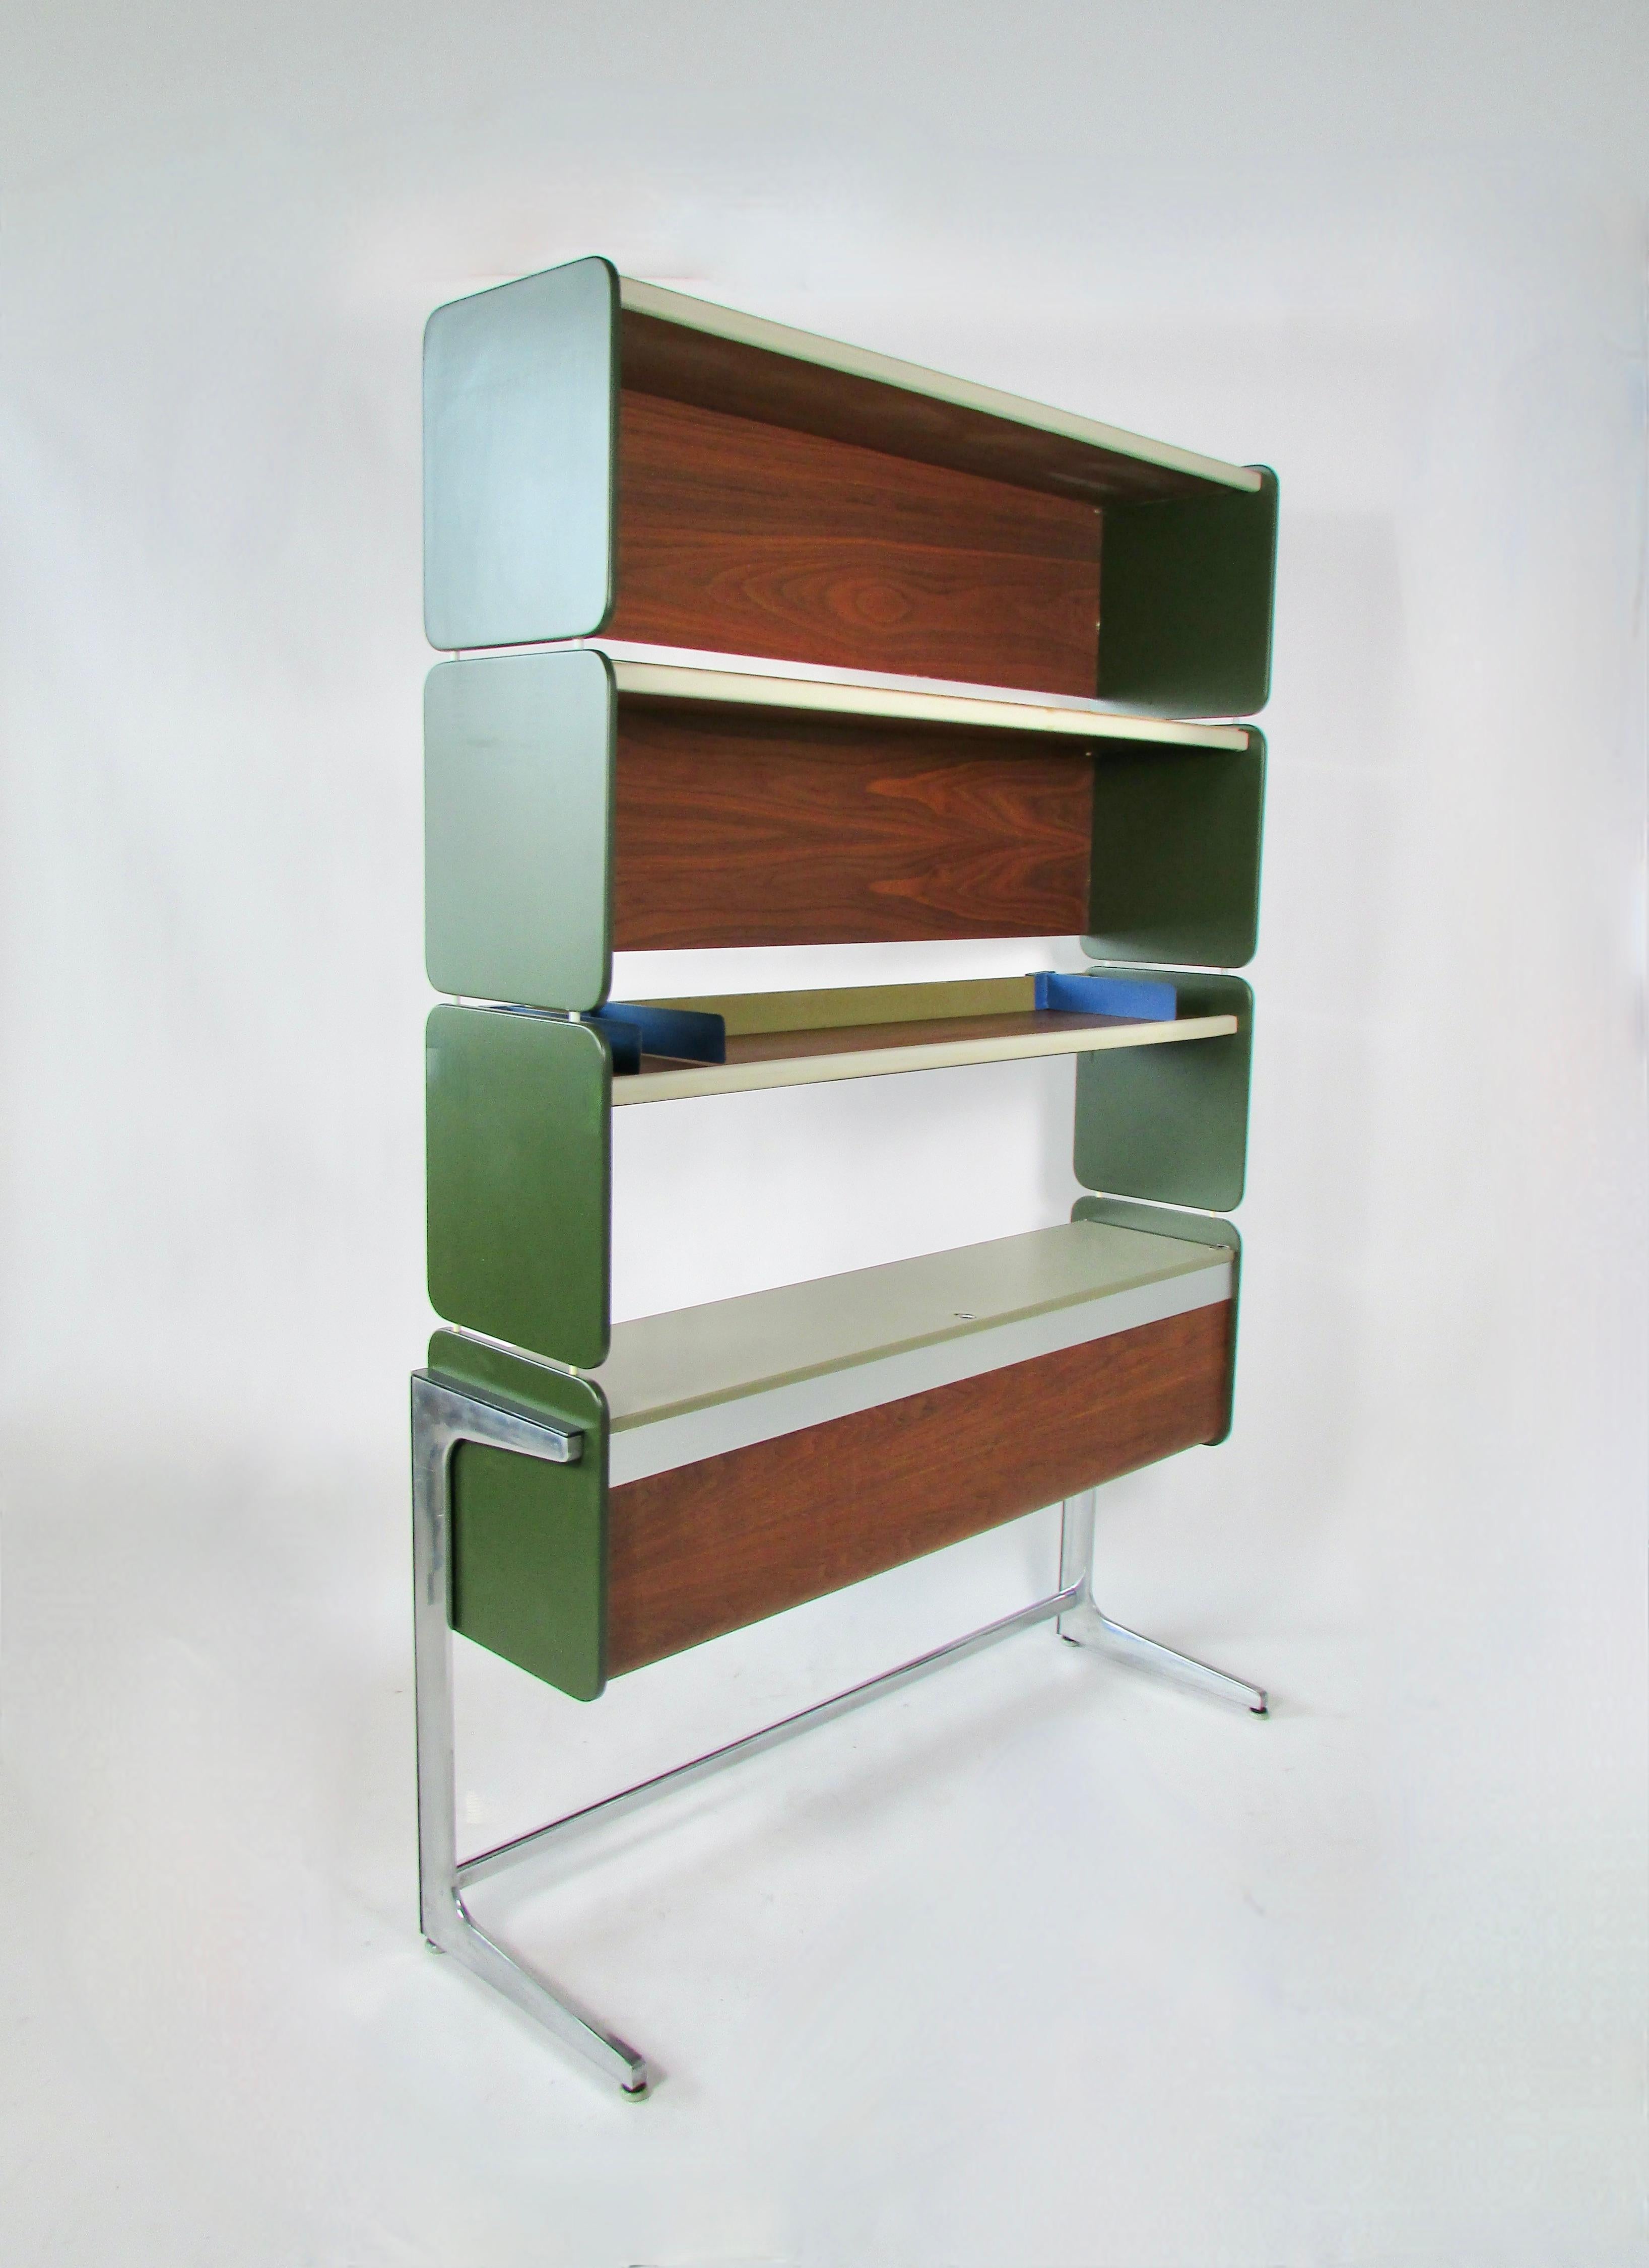 George Nelson Robert Prost Herman Miller Action Office storage shelving unit AO1 For Sale 2